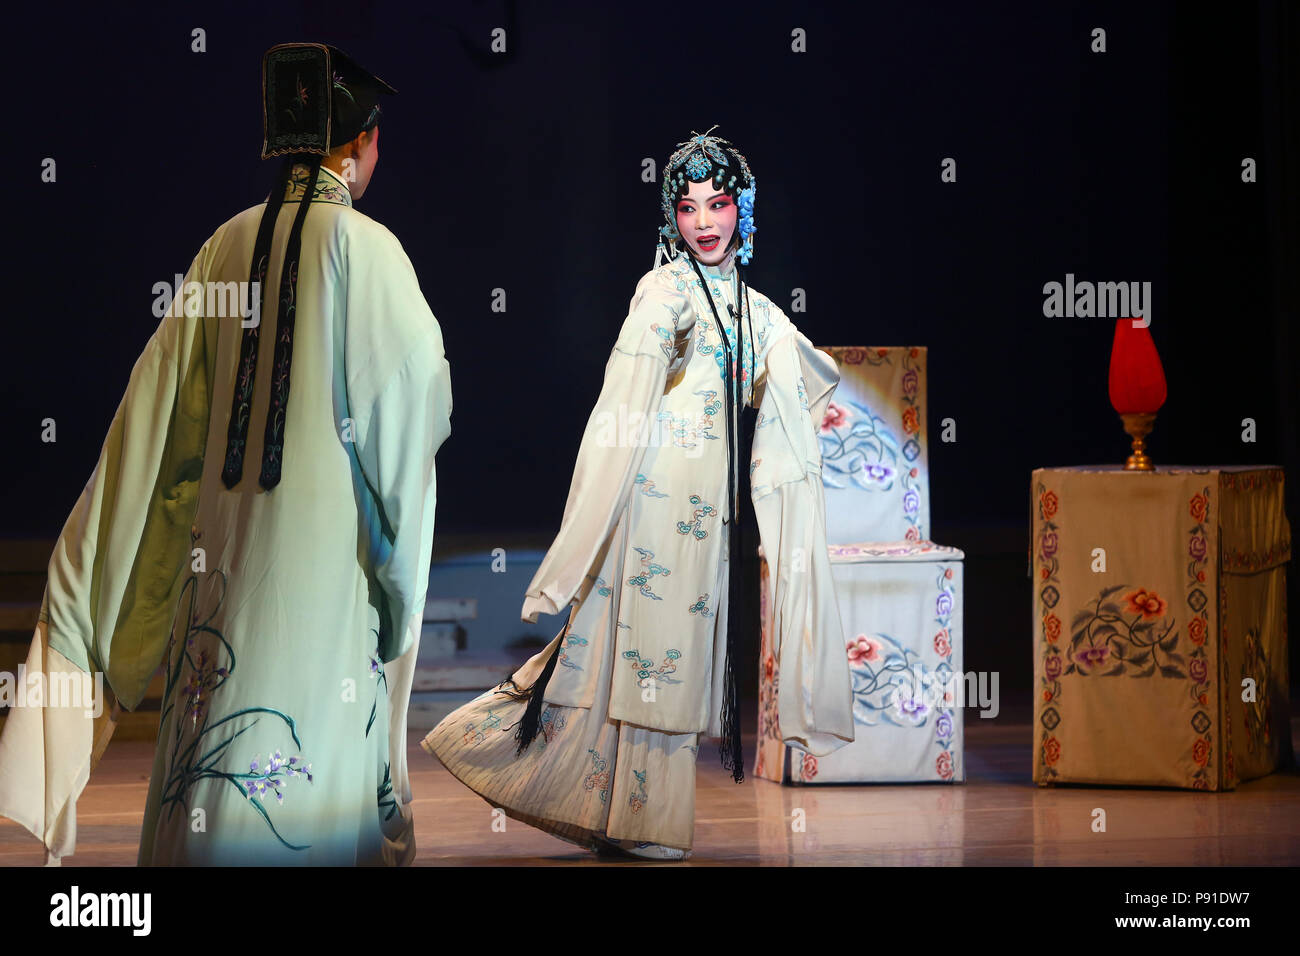 Tianjin, China. 13th July, 2018. College students perform Kunqu Opera 'the Peony Pavilion' at Nankai University in Tianjin, north China, July 13, 2018. 'Peony Pavilion', created by ancient Chinese playwright Tang Xianzu (1550-1616), tells a love story between Du Liniang and Liu Mengmei, embodying young people's pursuit of love and freedom. Credit: Liu Dongyue/Xinhua/Alamy Live News Stock Photo